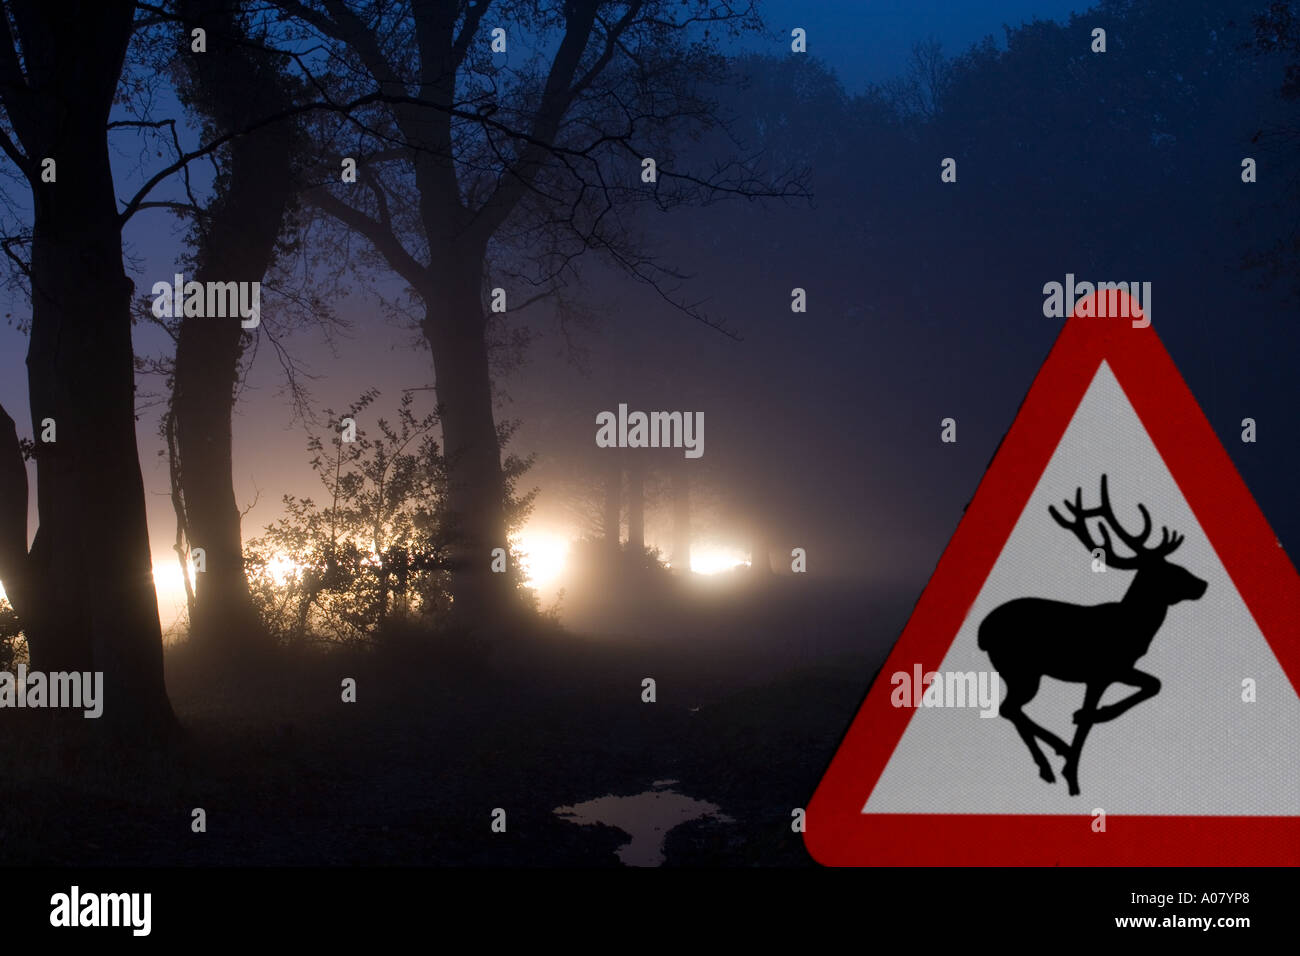 Deer Warning Sign on Country Road Banque D'Images